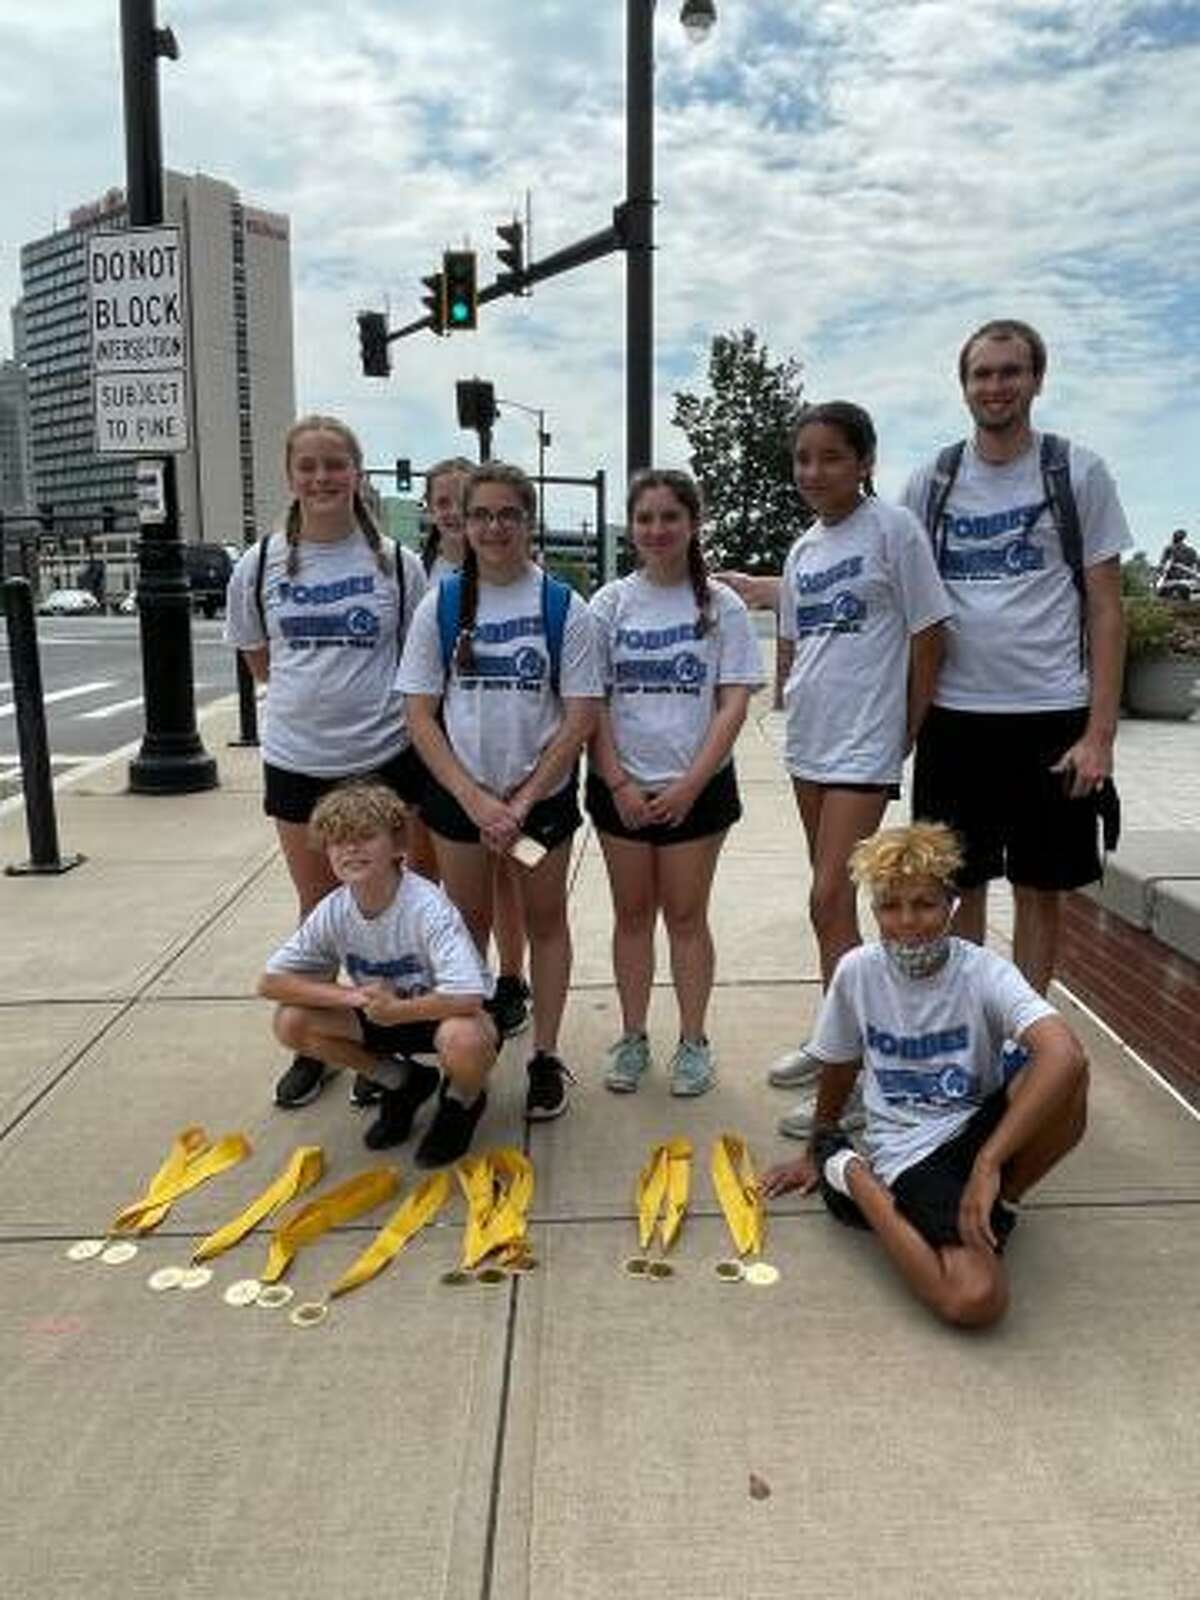 The Forbes Flyers jump rope team came home with first-place awards after competing at the Yard Goats Stadium at Dunkin' Donuts Park Aug. 7-8, 2021.